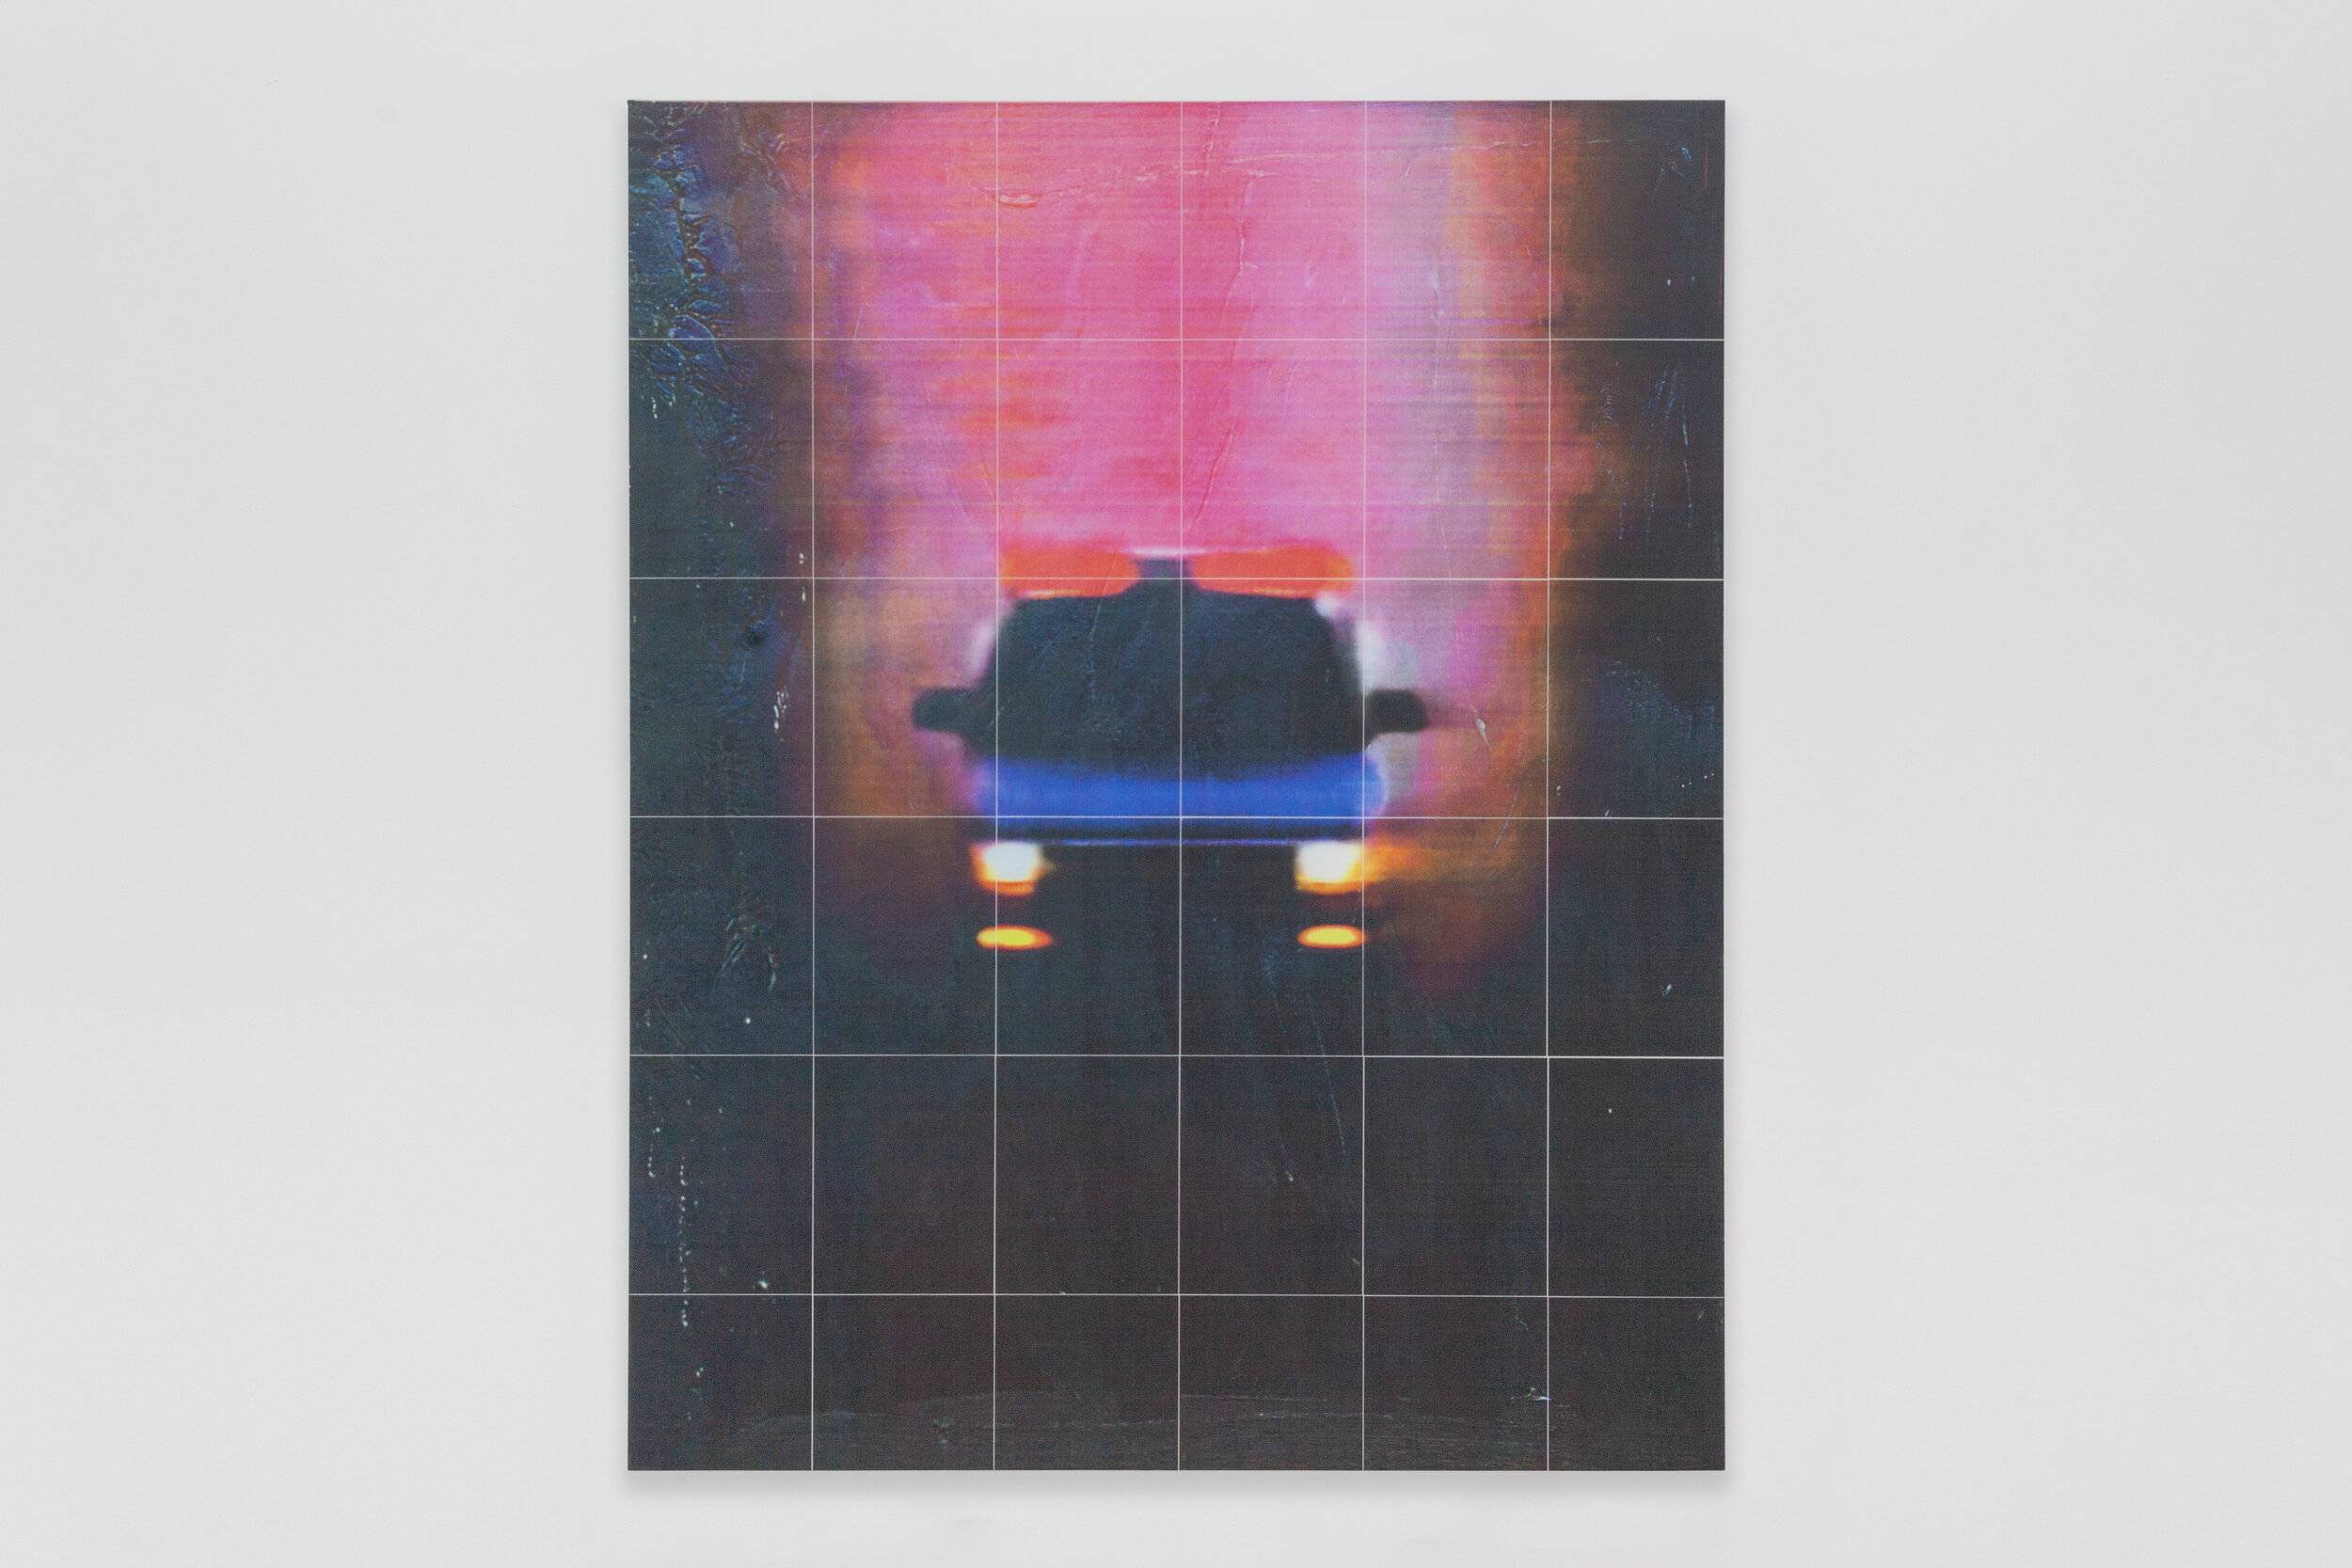  Stephen McClintock,  Bowtie (Truck in the Dusk) , 2020, mixed media and resin on aluminum panel, 60 x 48 in. (152.4 x 121.9 cm) 